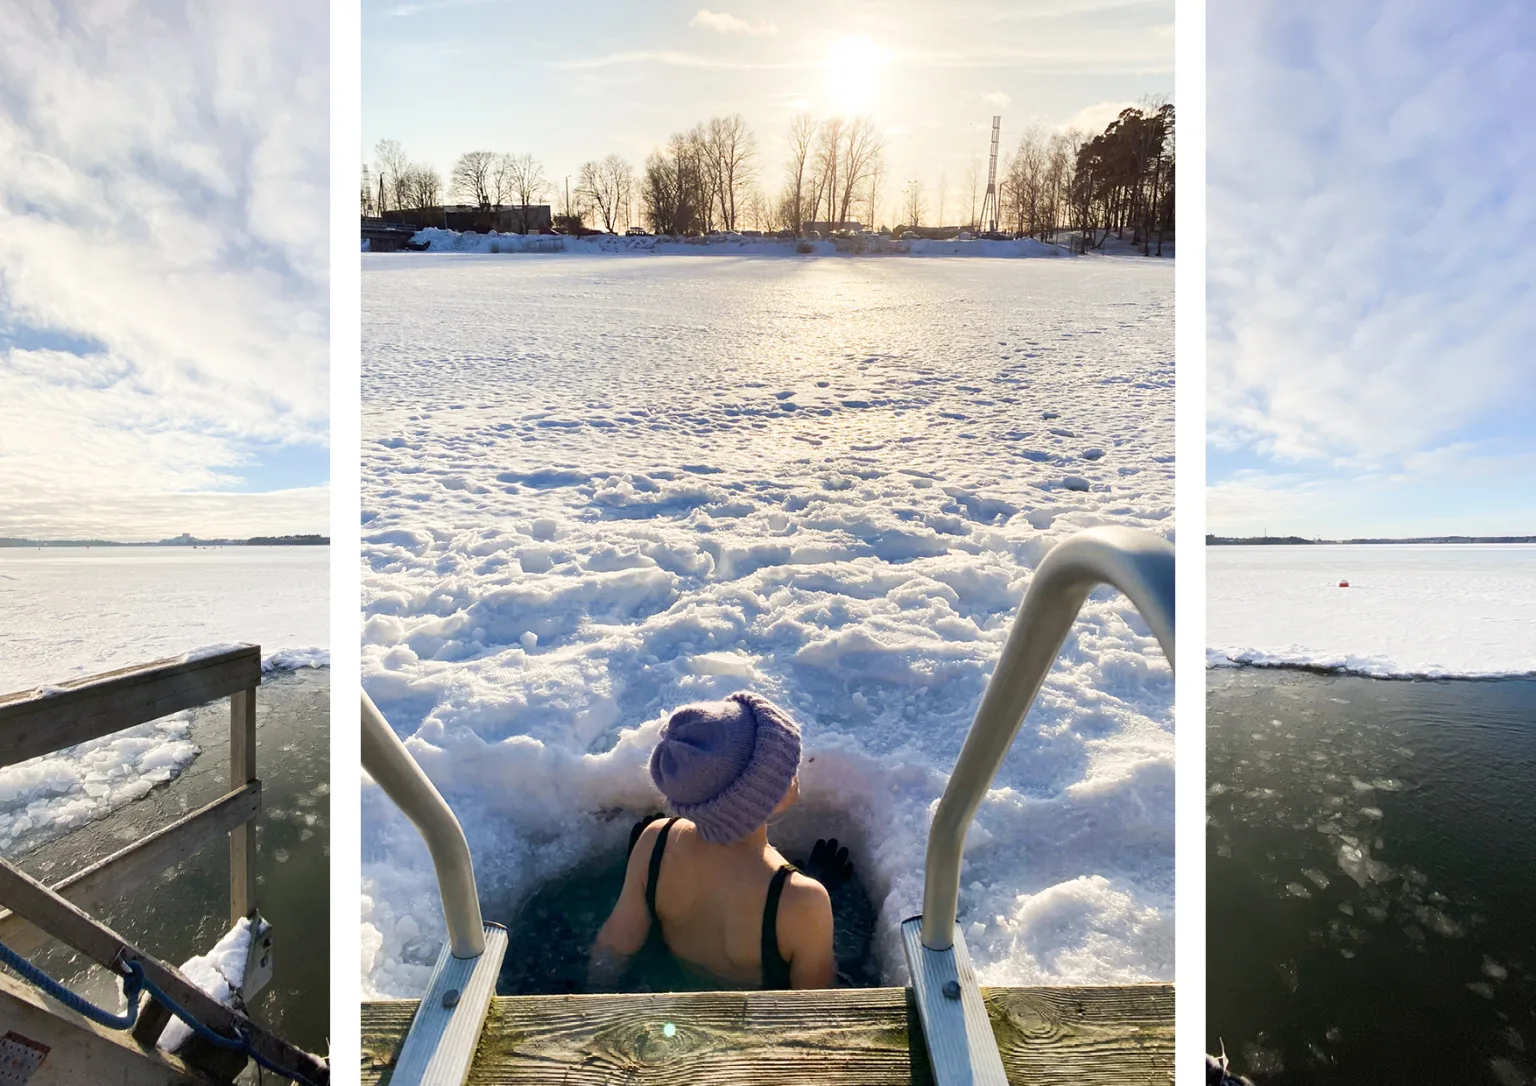 How to get started with winter swimming?